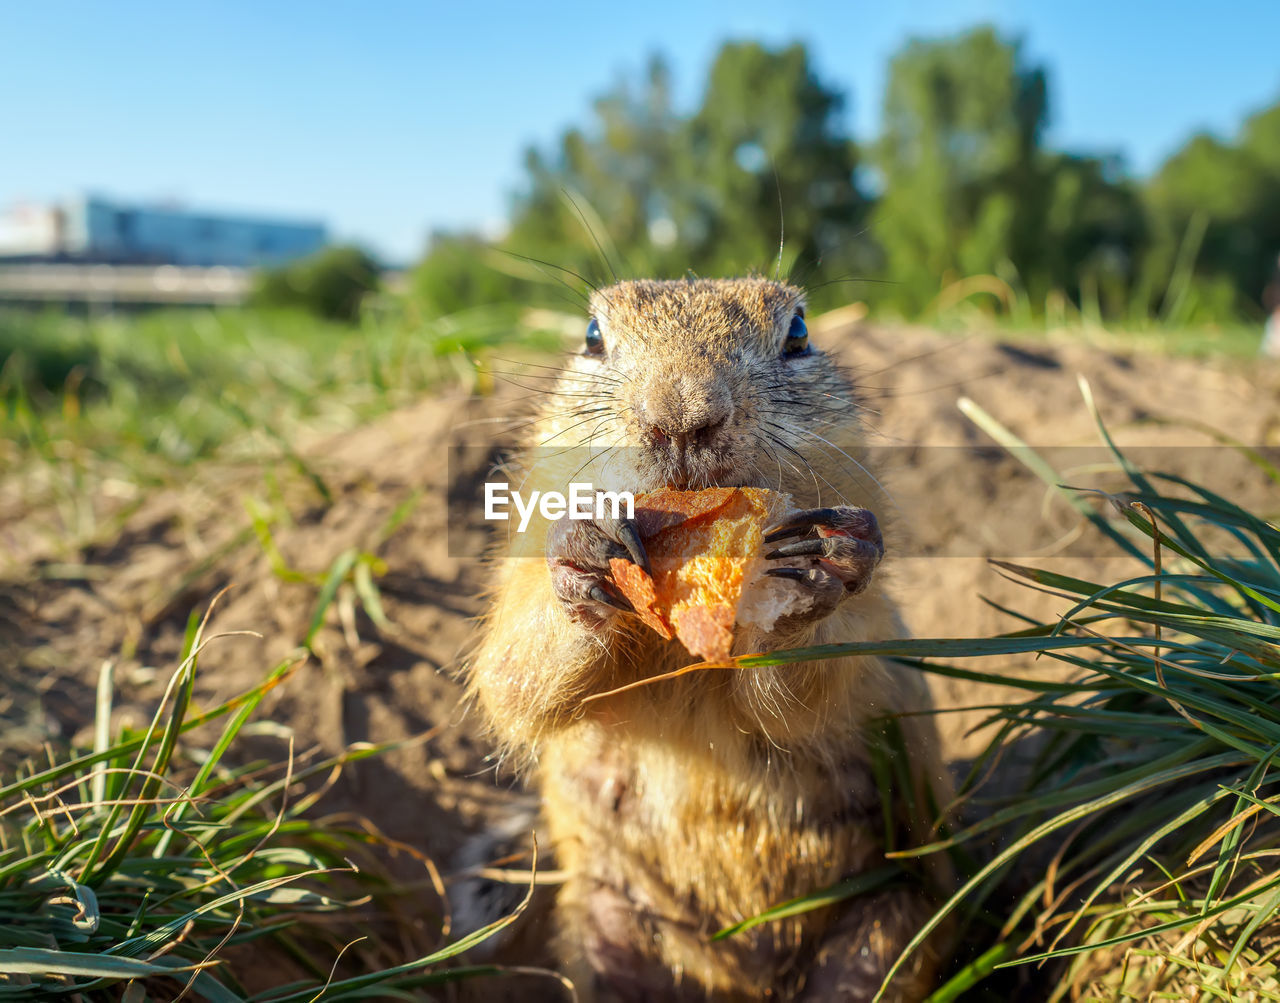 animal, animal themes, grass, nature, animal wildlife, mammal, wildlife, one animal, no people, plant, portrait, rodent, eating, food, squirrel, looking at camera, focus on foreground, day, outdoors, sky, food and drink, sunlight, close-up, prairie, cute, flower, front view